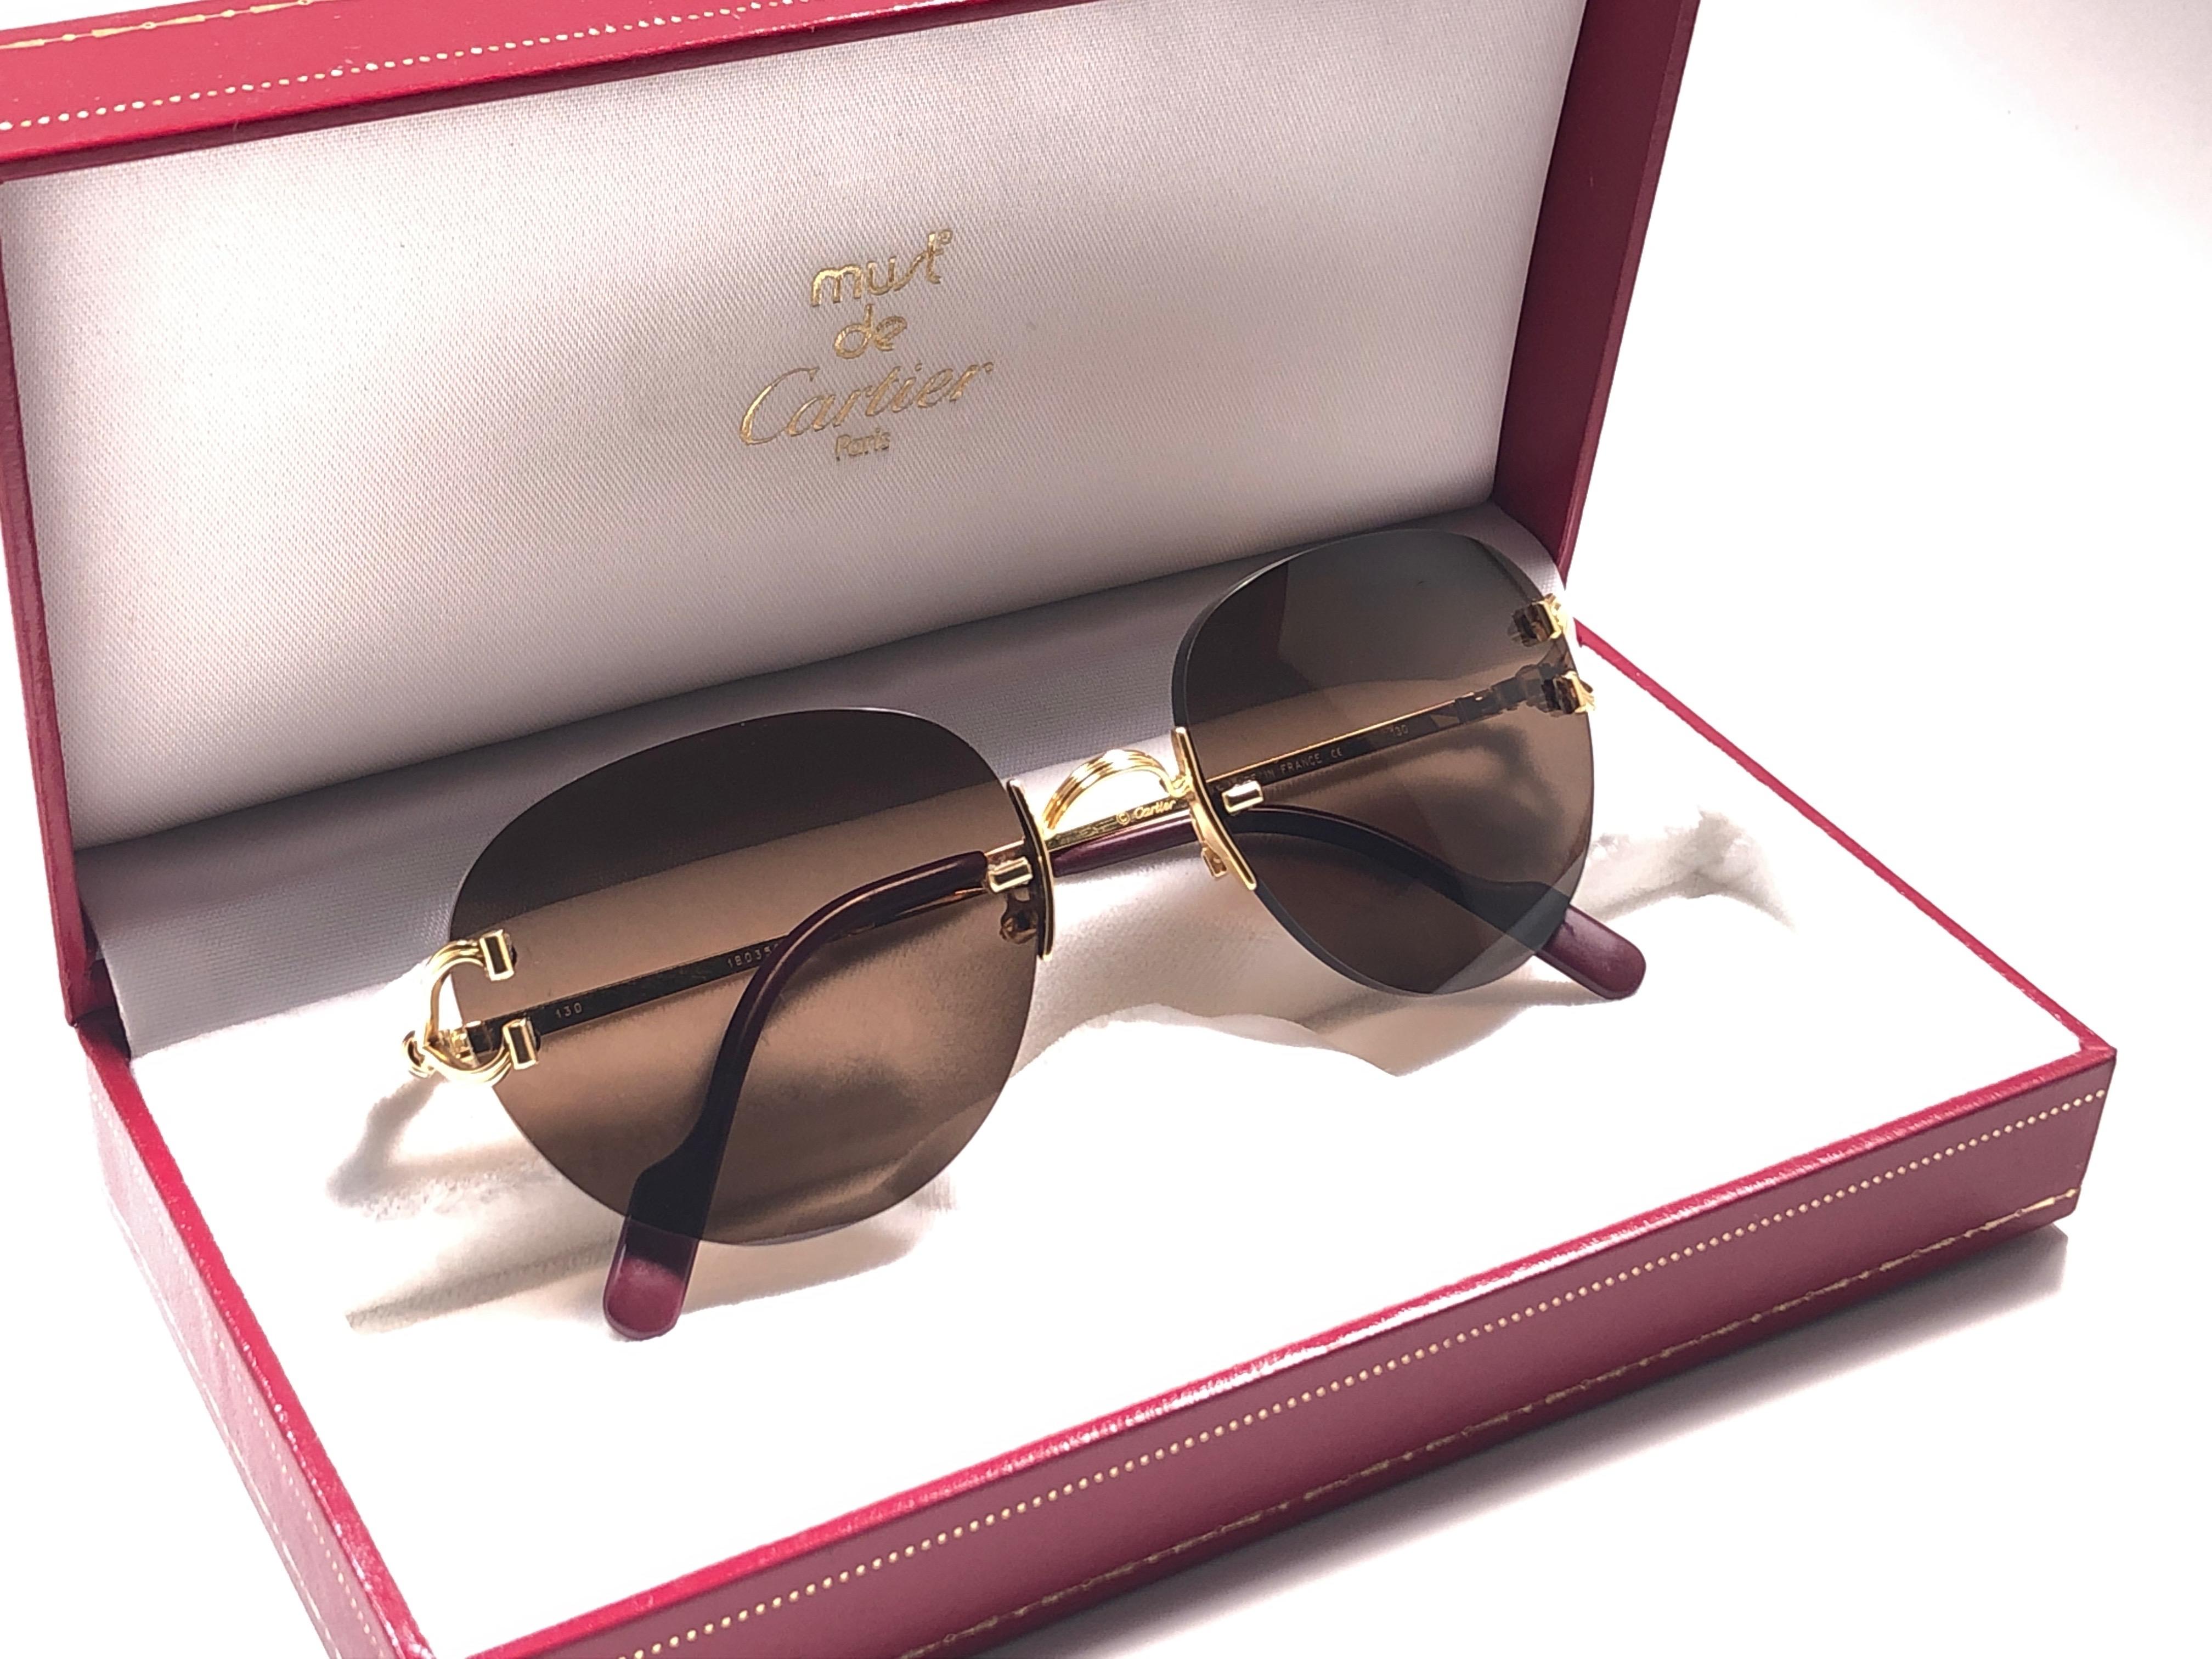 New Cartier Salisbury unique rimless special edition sunglasses with solid brown (uv protection) lenses.  Frame with the front and sides in special edition gold. All hallmarks. Cartier gold signs on the ear paddles.  These are like a pair of jewels